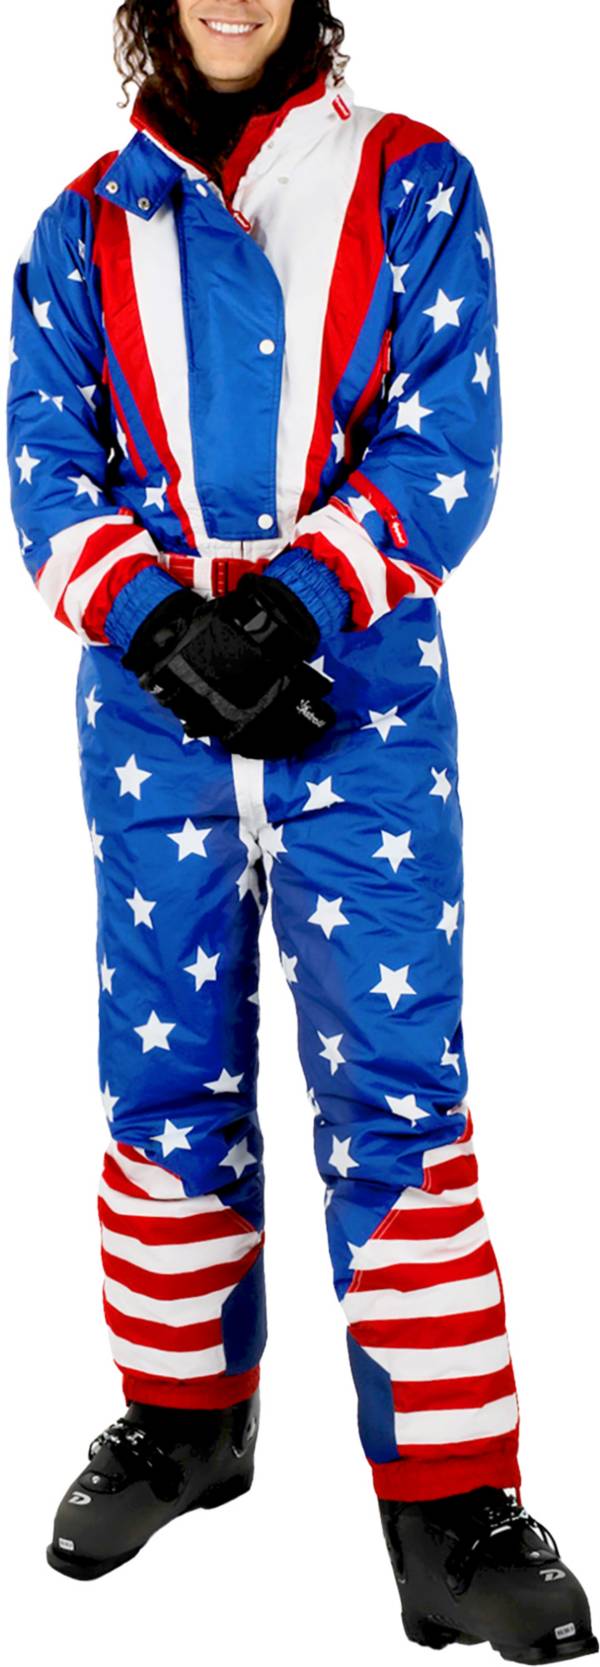 Tipsy Elves Men's Americana Snow Suit product image